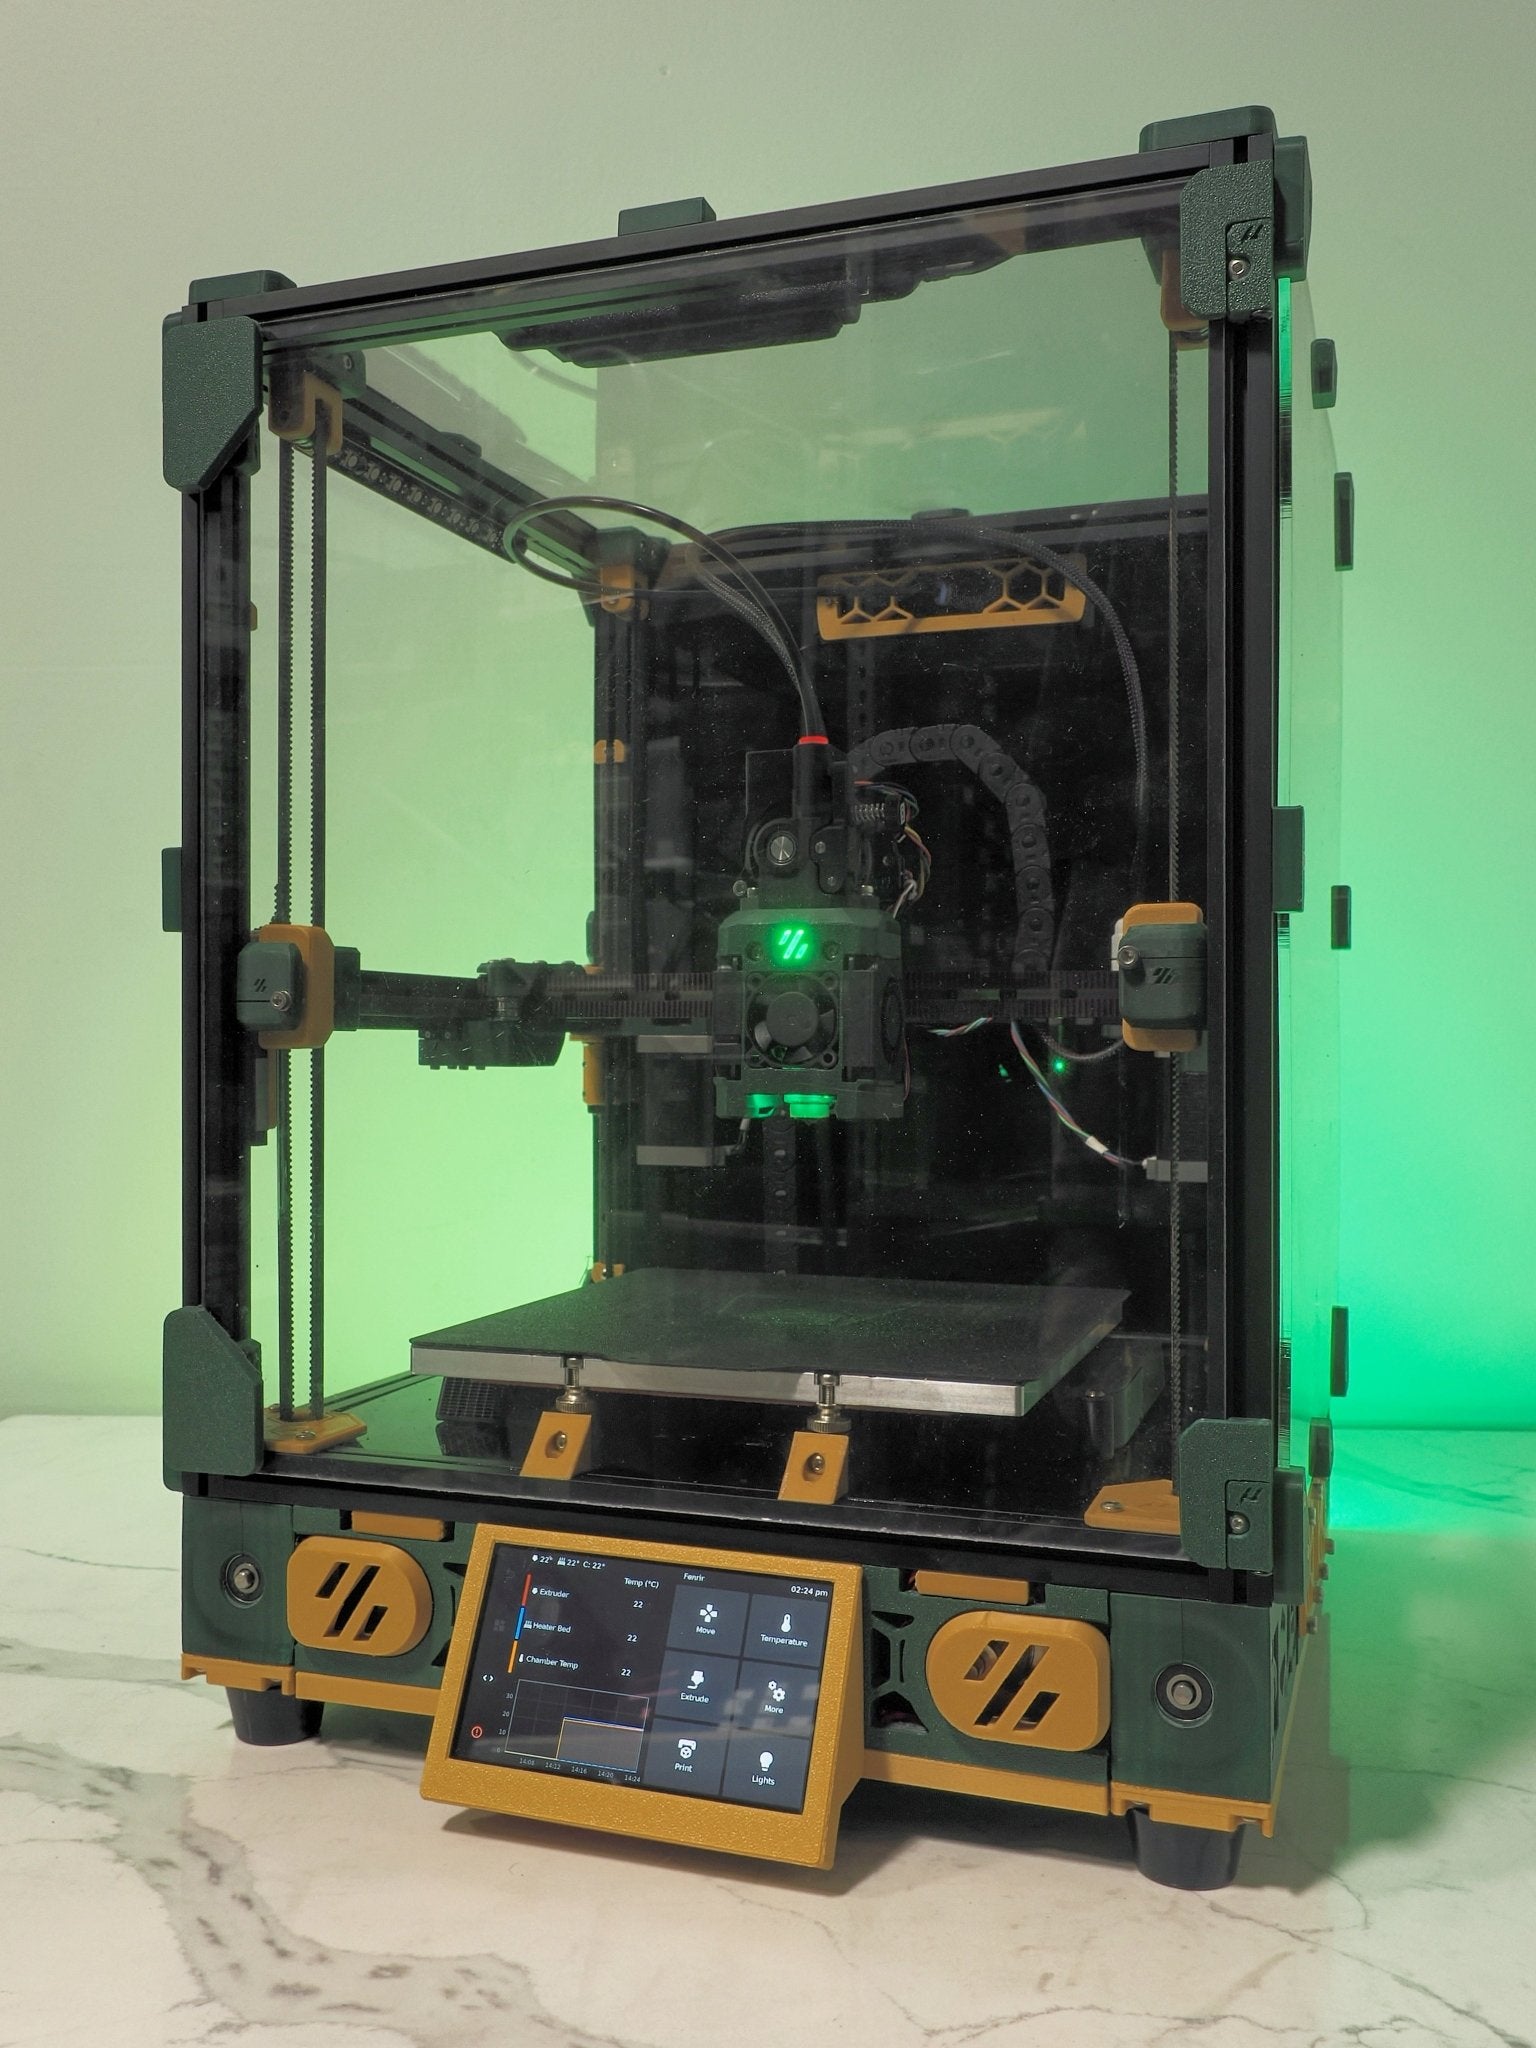 Micron Plus 180 Self-Source Configurator by West3D (Printers for Ants) - West3D 3D Printing Supplies - West3D Printing